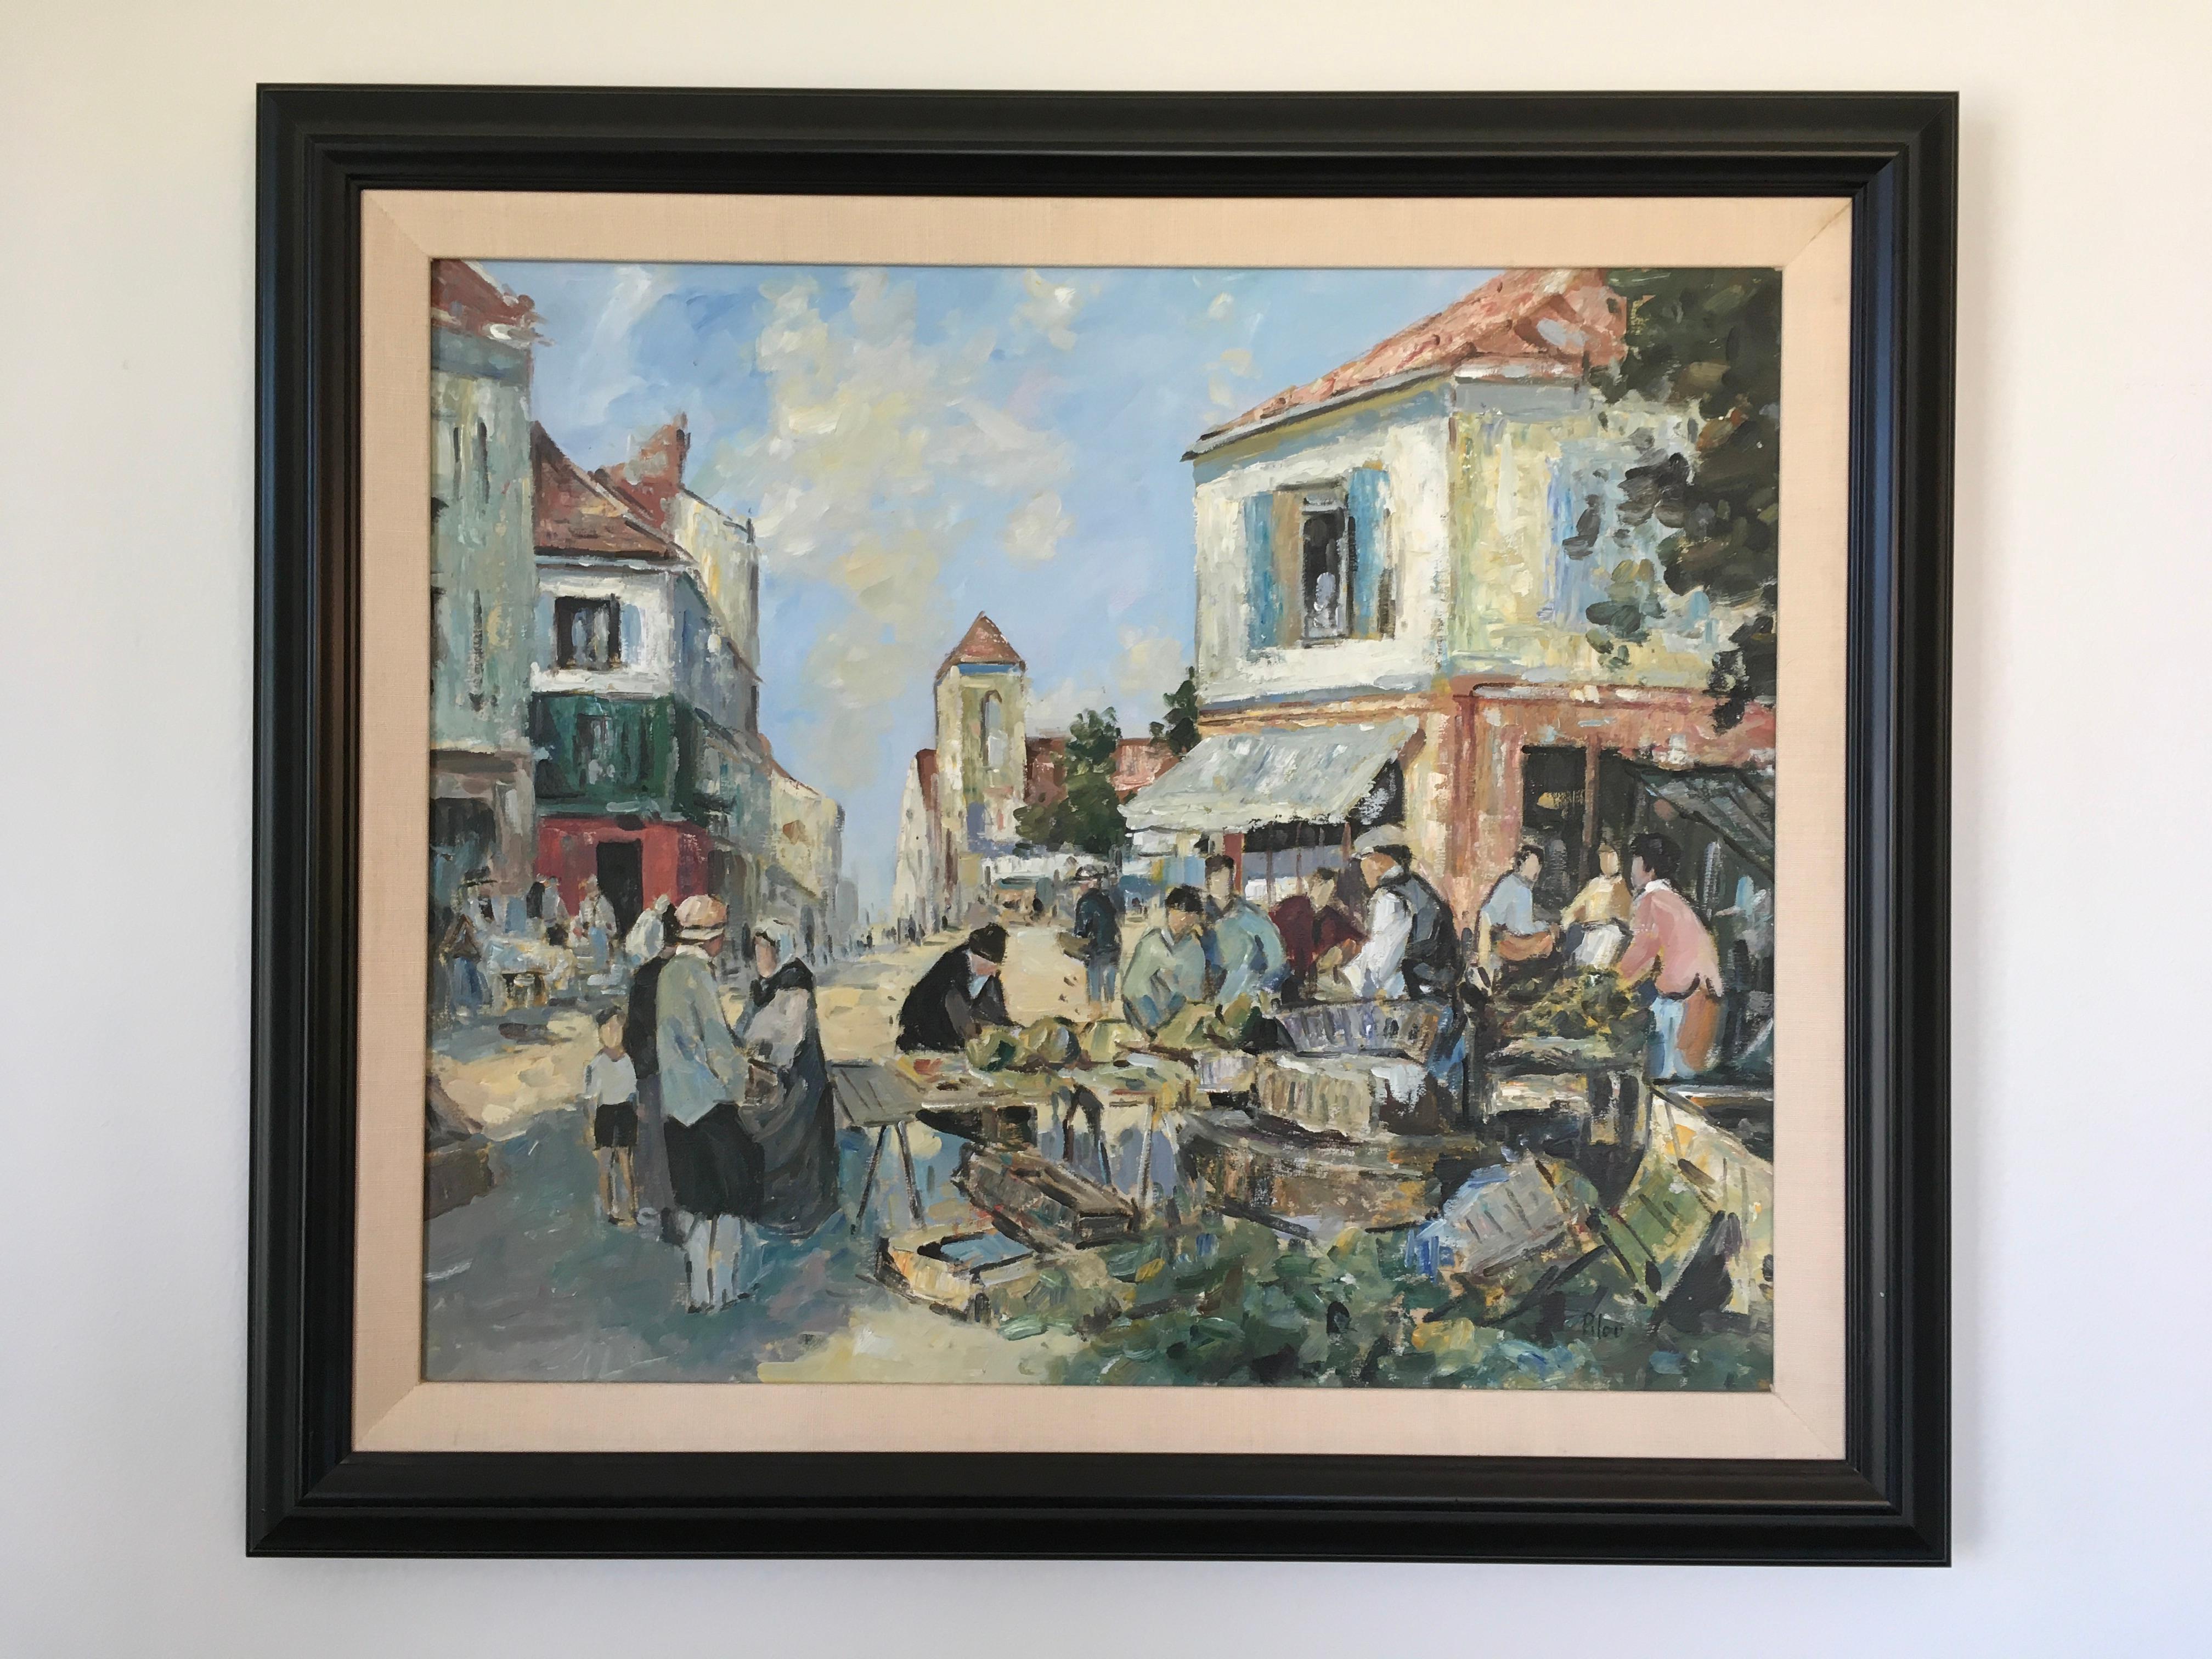 This signed 25.5" x 29.5" oil on canvas painting is by an unknown artist as the signature is unintelligible in the bottom right corner of the painting. The painting depicts a busy street scene with people, buildings, and market. The figures are